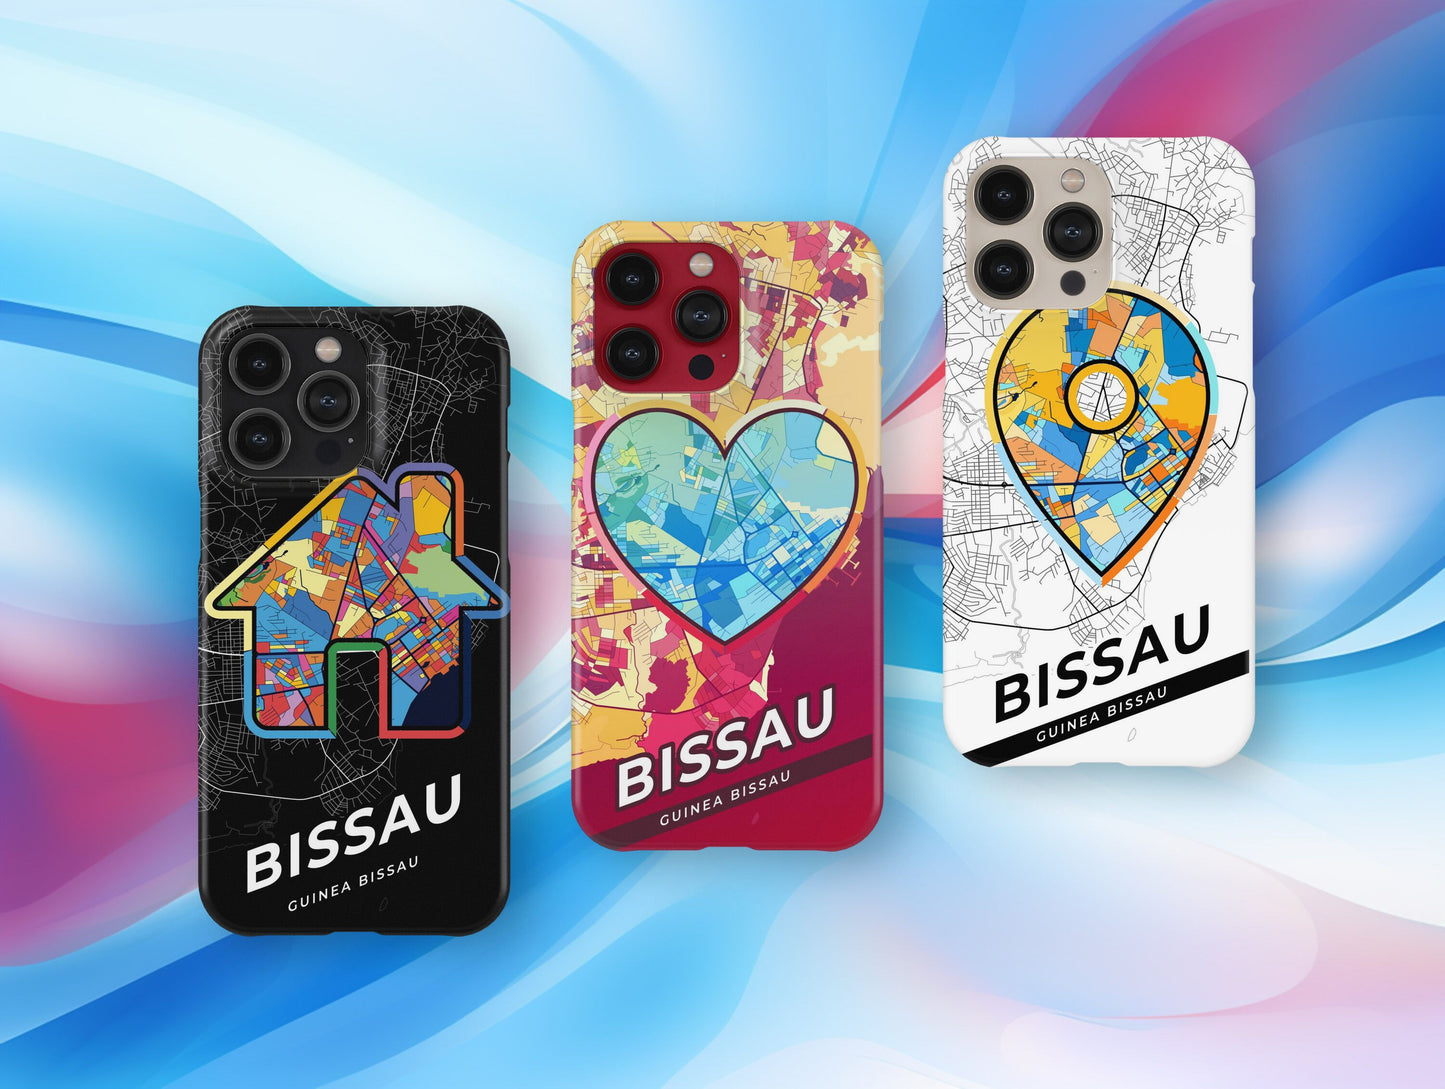 Bissau Guinea Bissau slim phone case with colorful icon. Birthday, wedding or housewarming gift. Couple match cases.